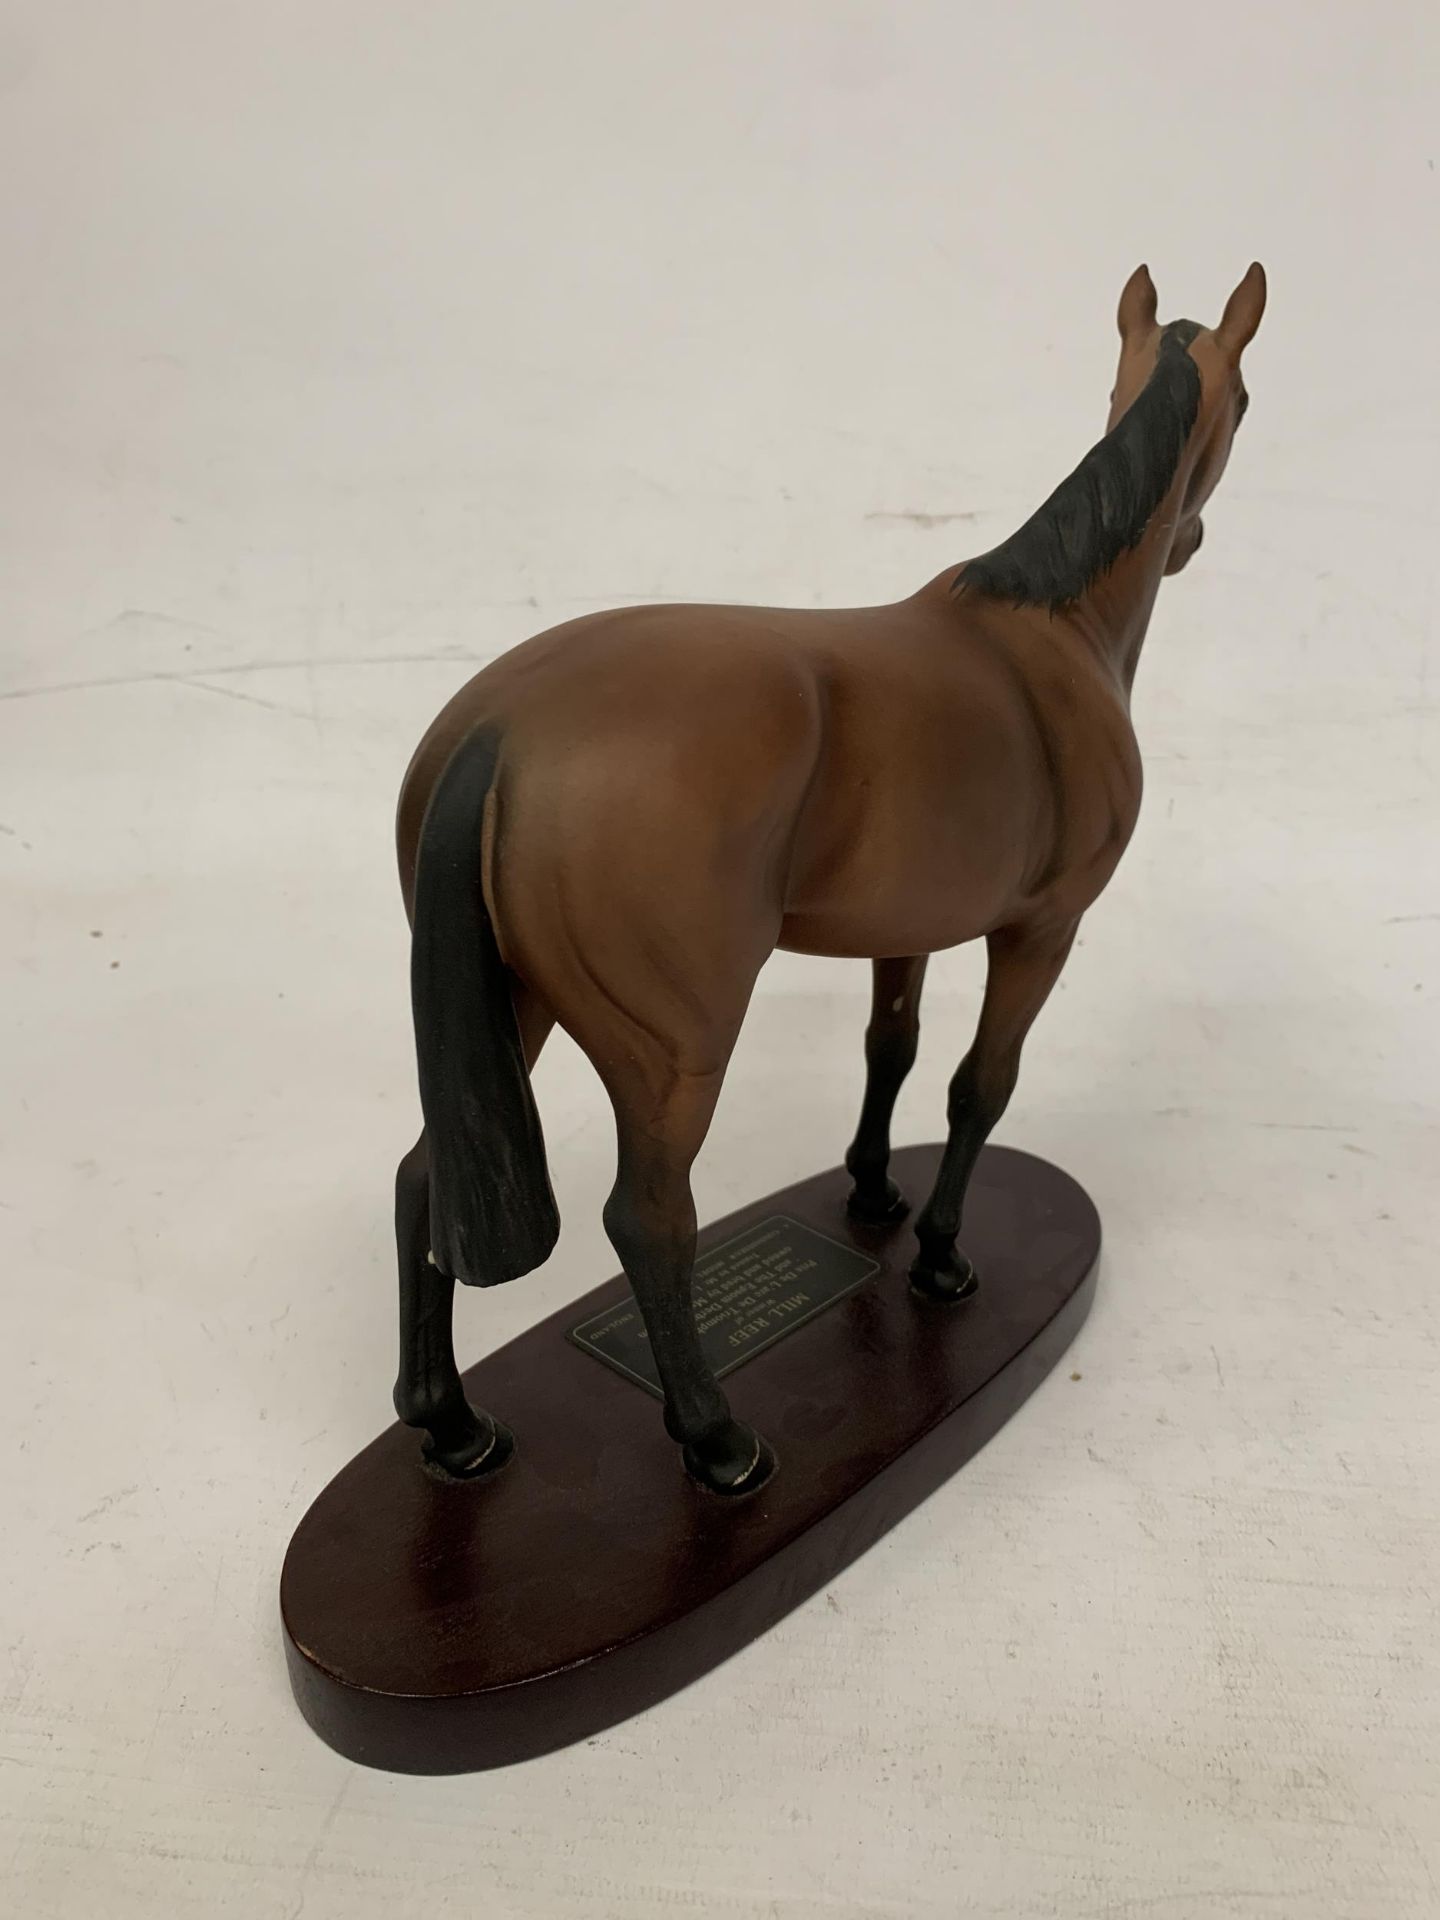 A BESWICK "MILL REEF" HORSE ON WOODEN PLINTH - Image 3 of 5